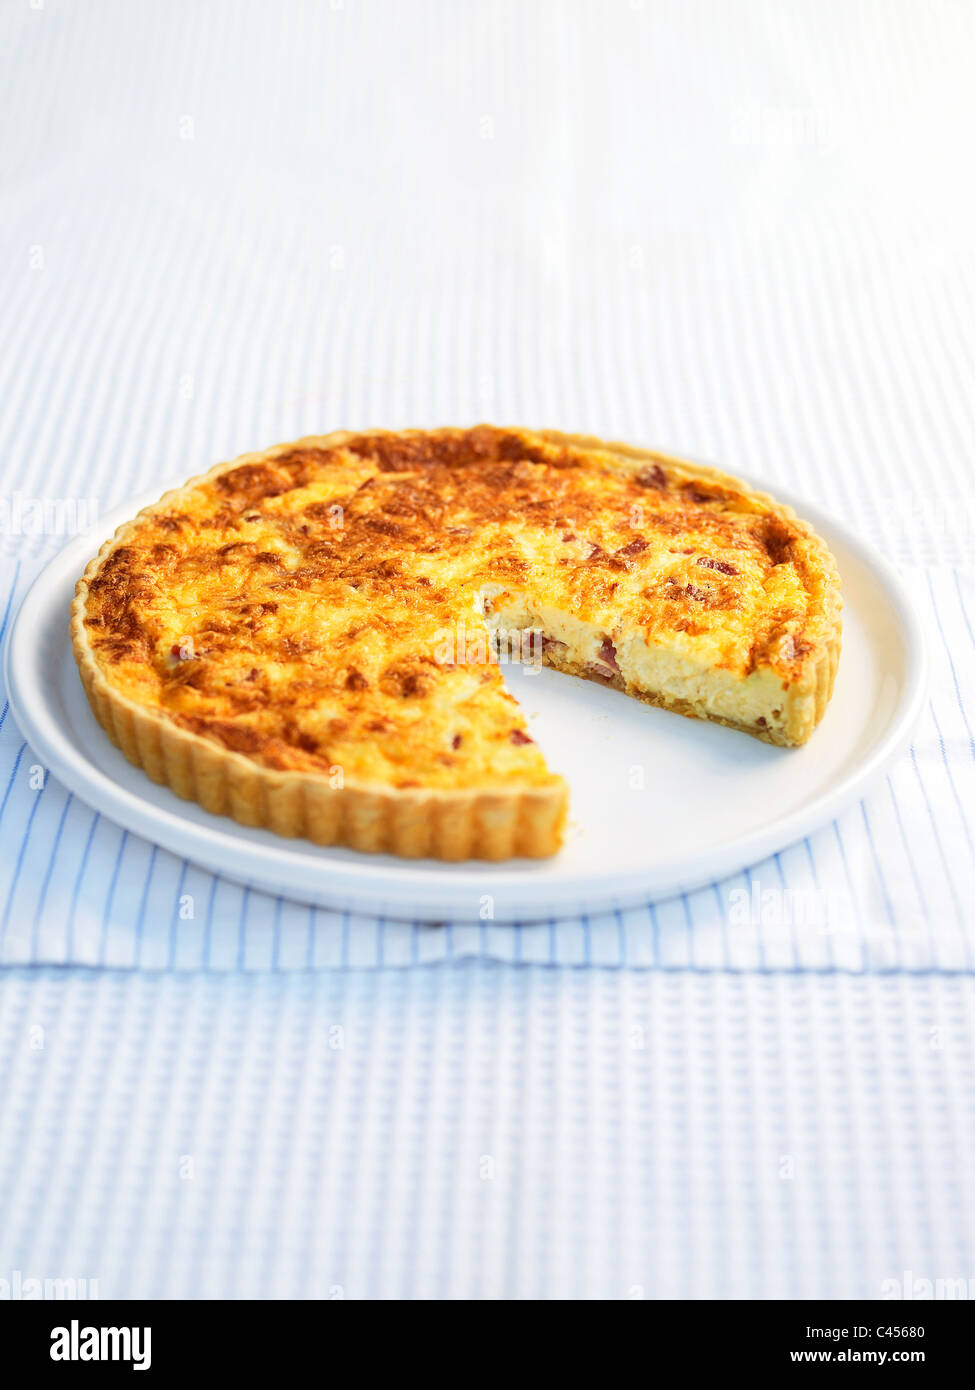 Horderves on plate stock image. Image of quiche, snack - 194643165